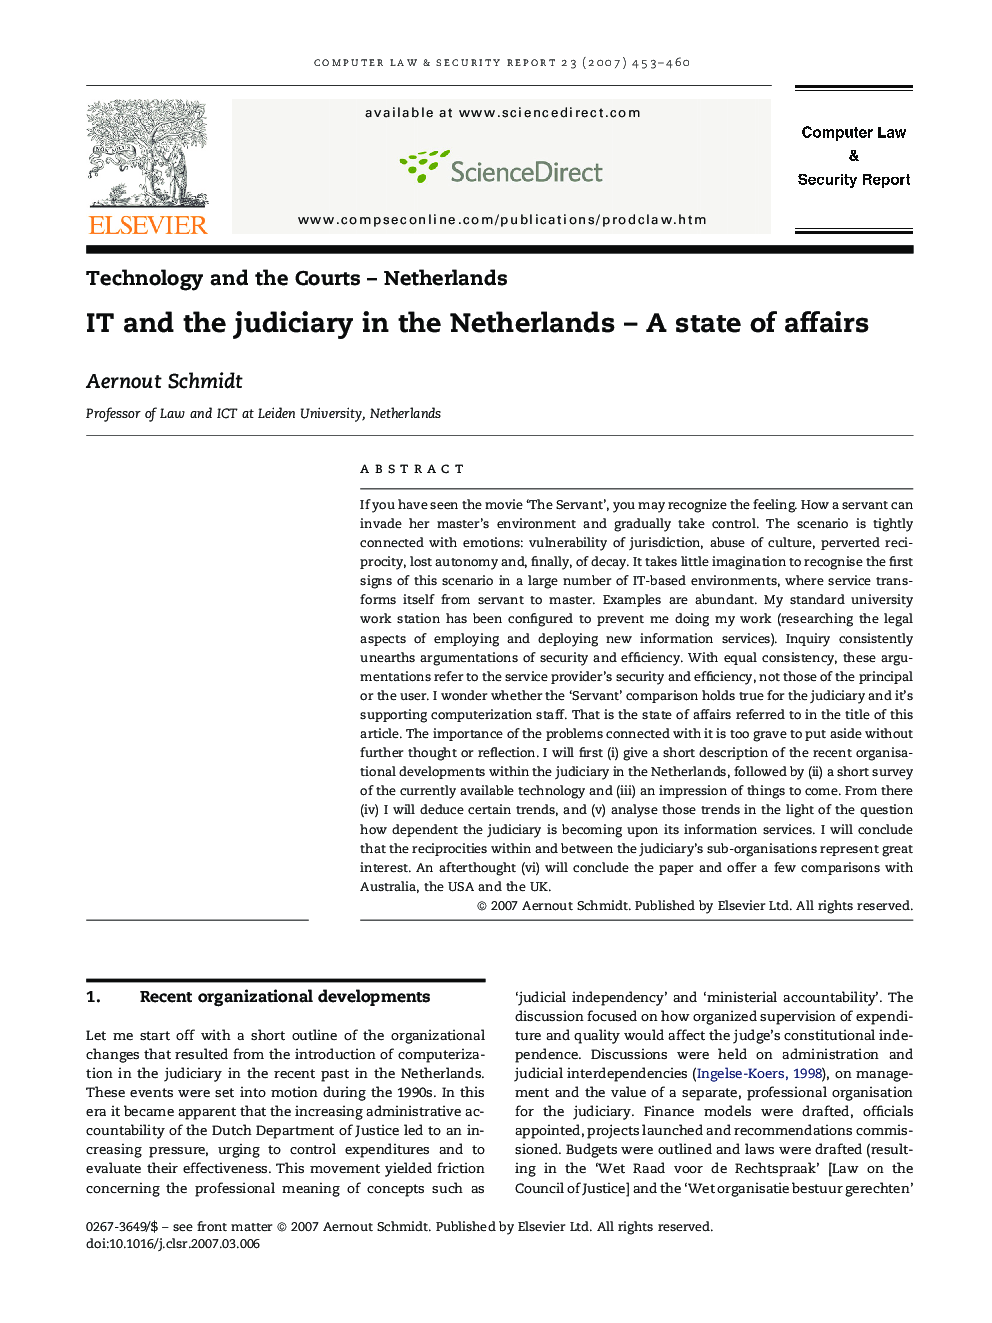 IT and the judiciary in the Netherlands – A state of affairs